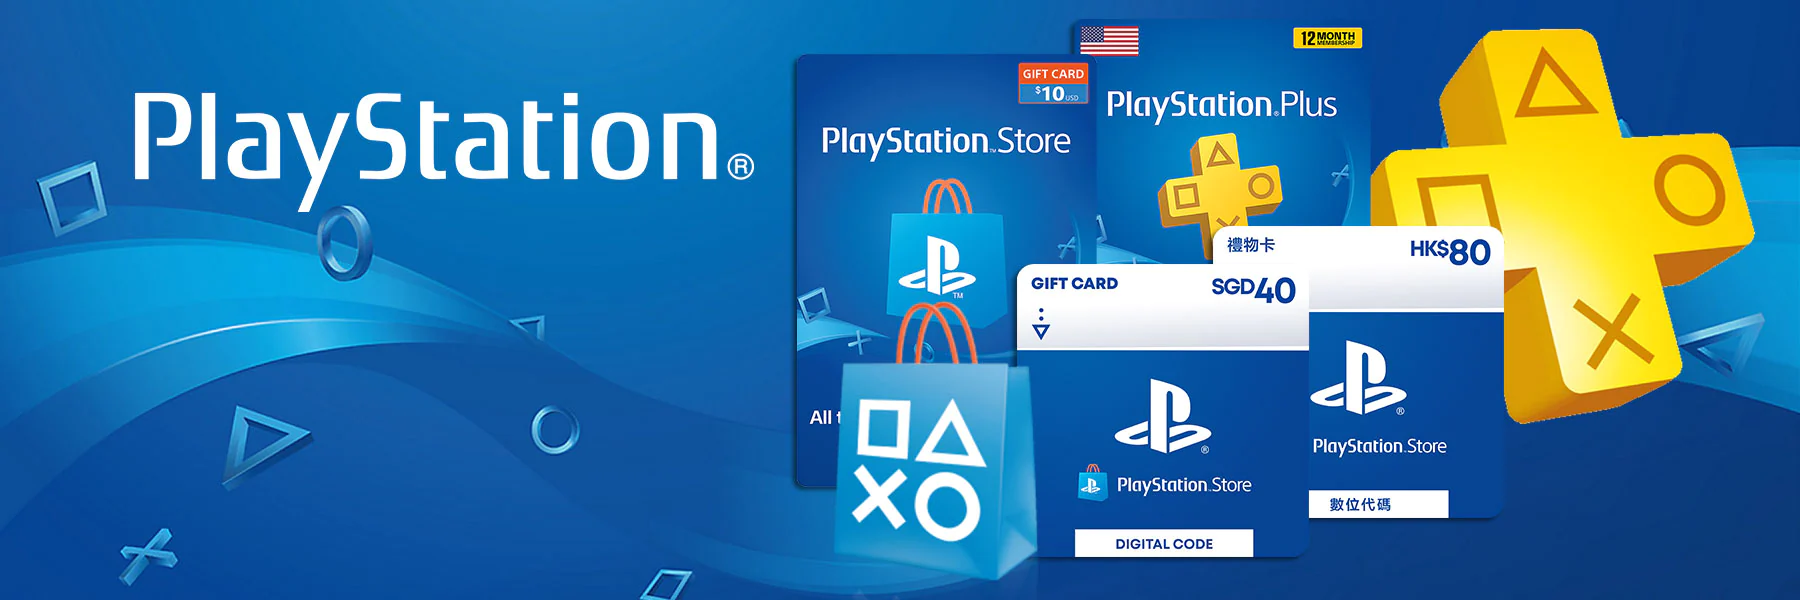 Banner Playstation Store